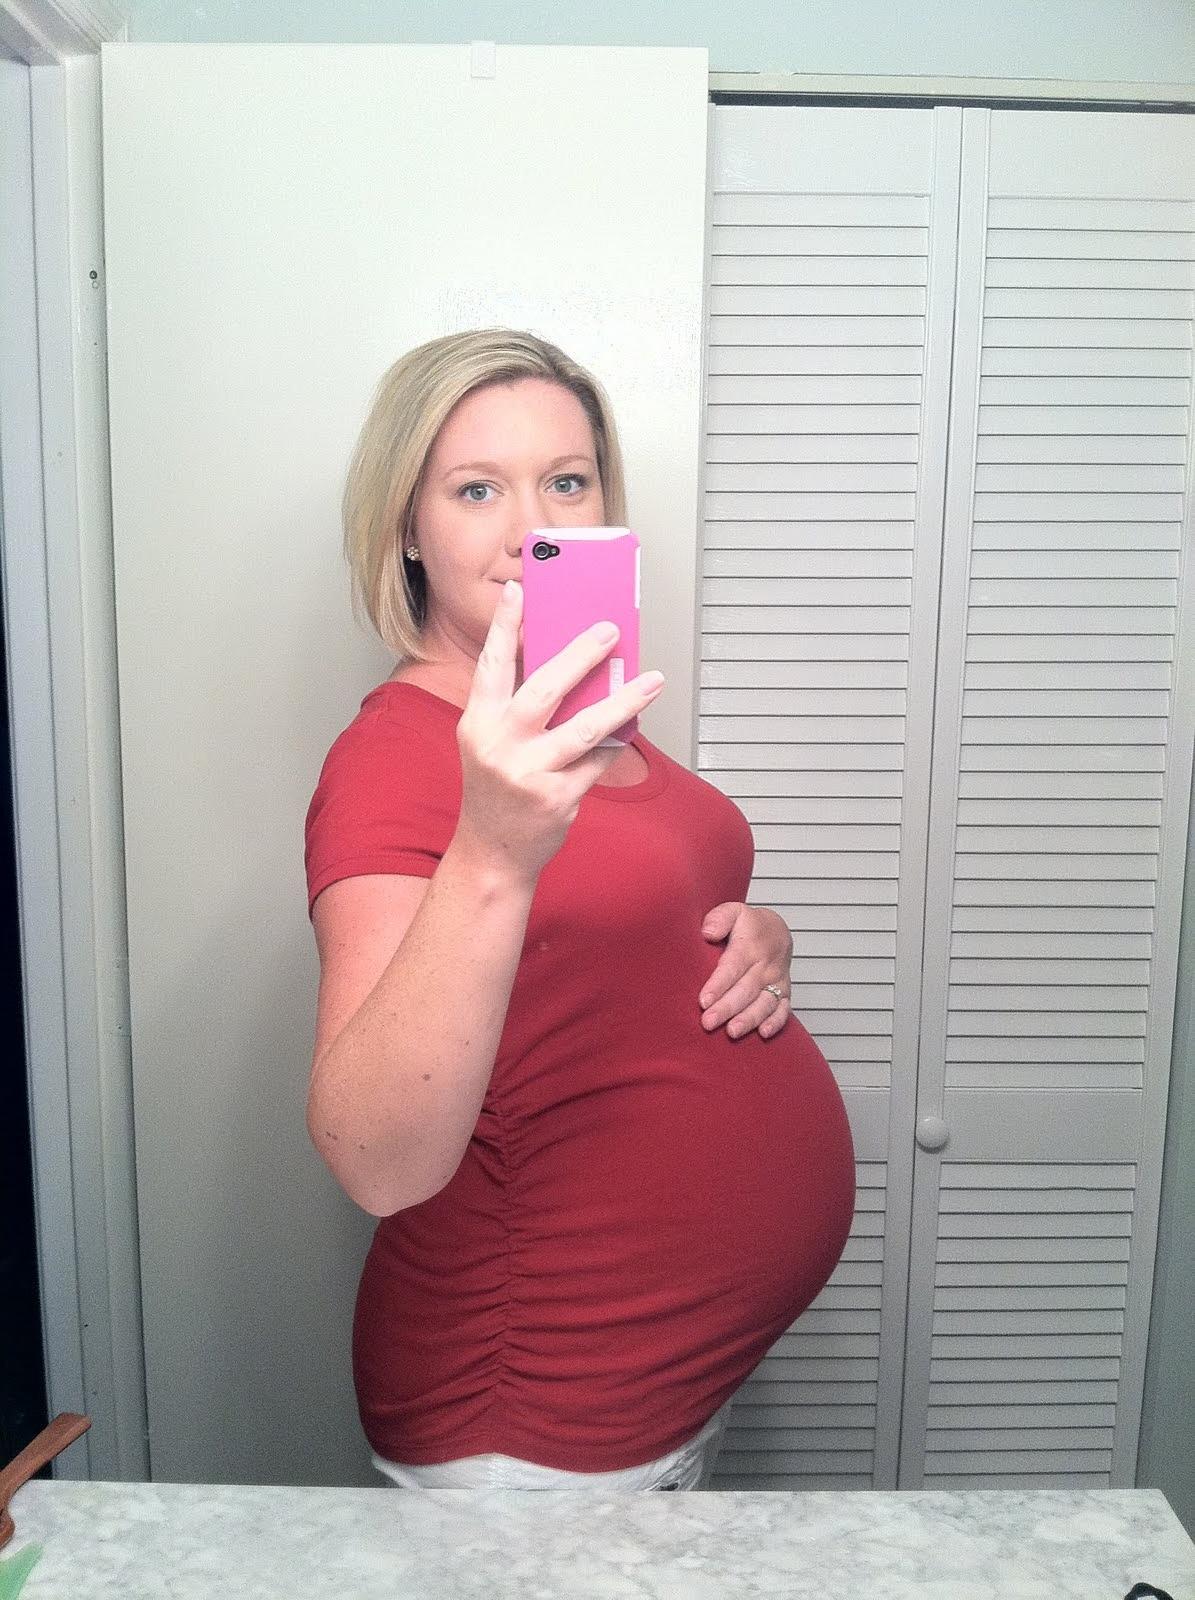 My 28 week bump picture.